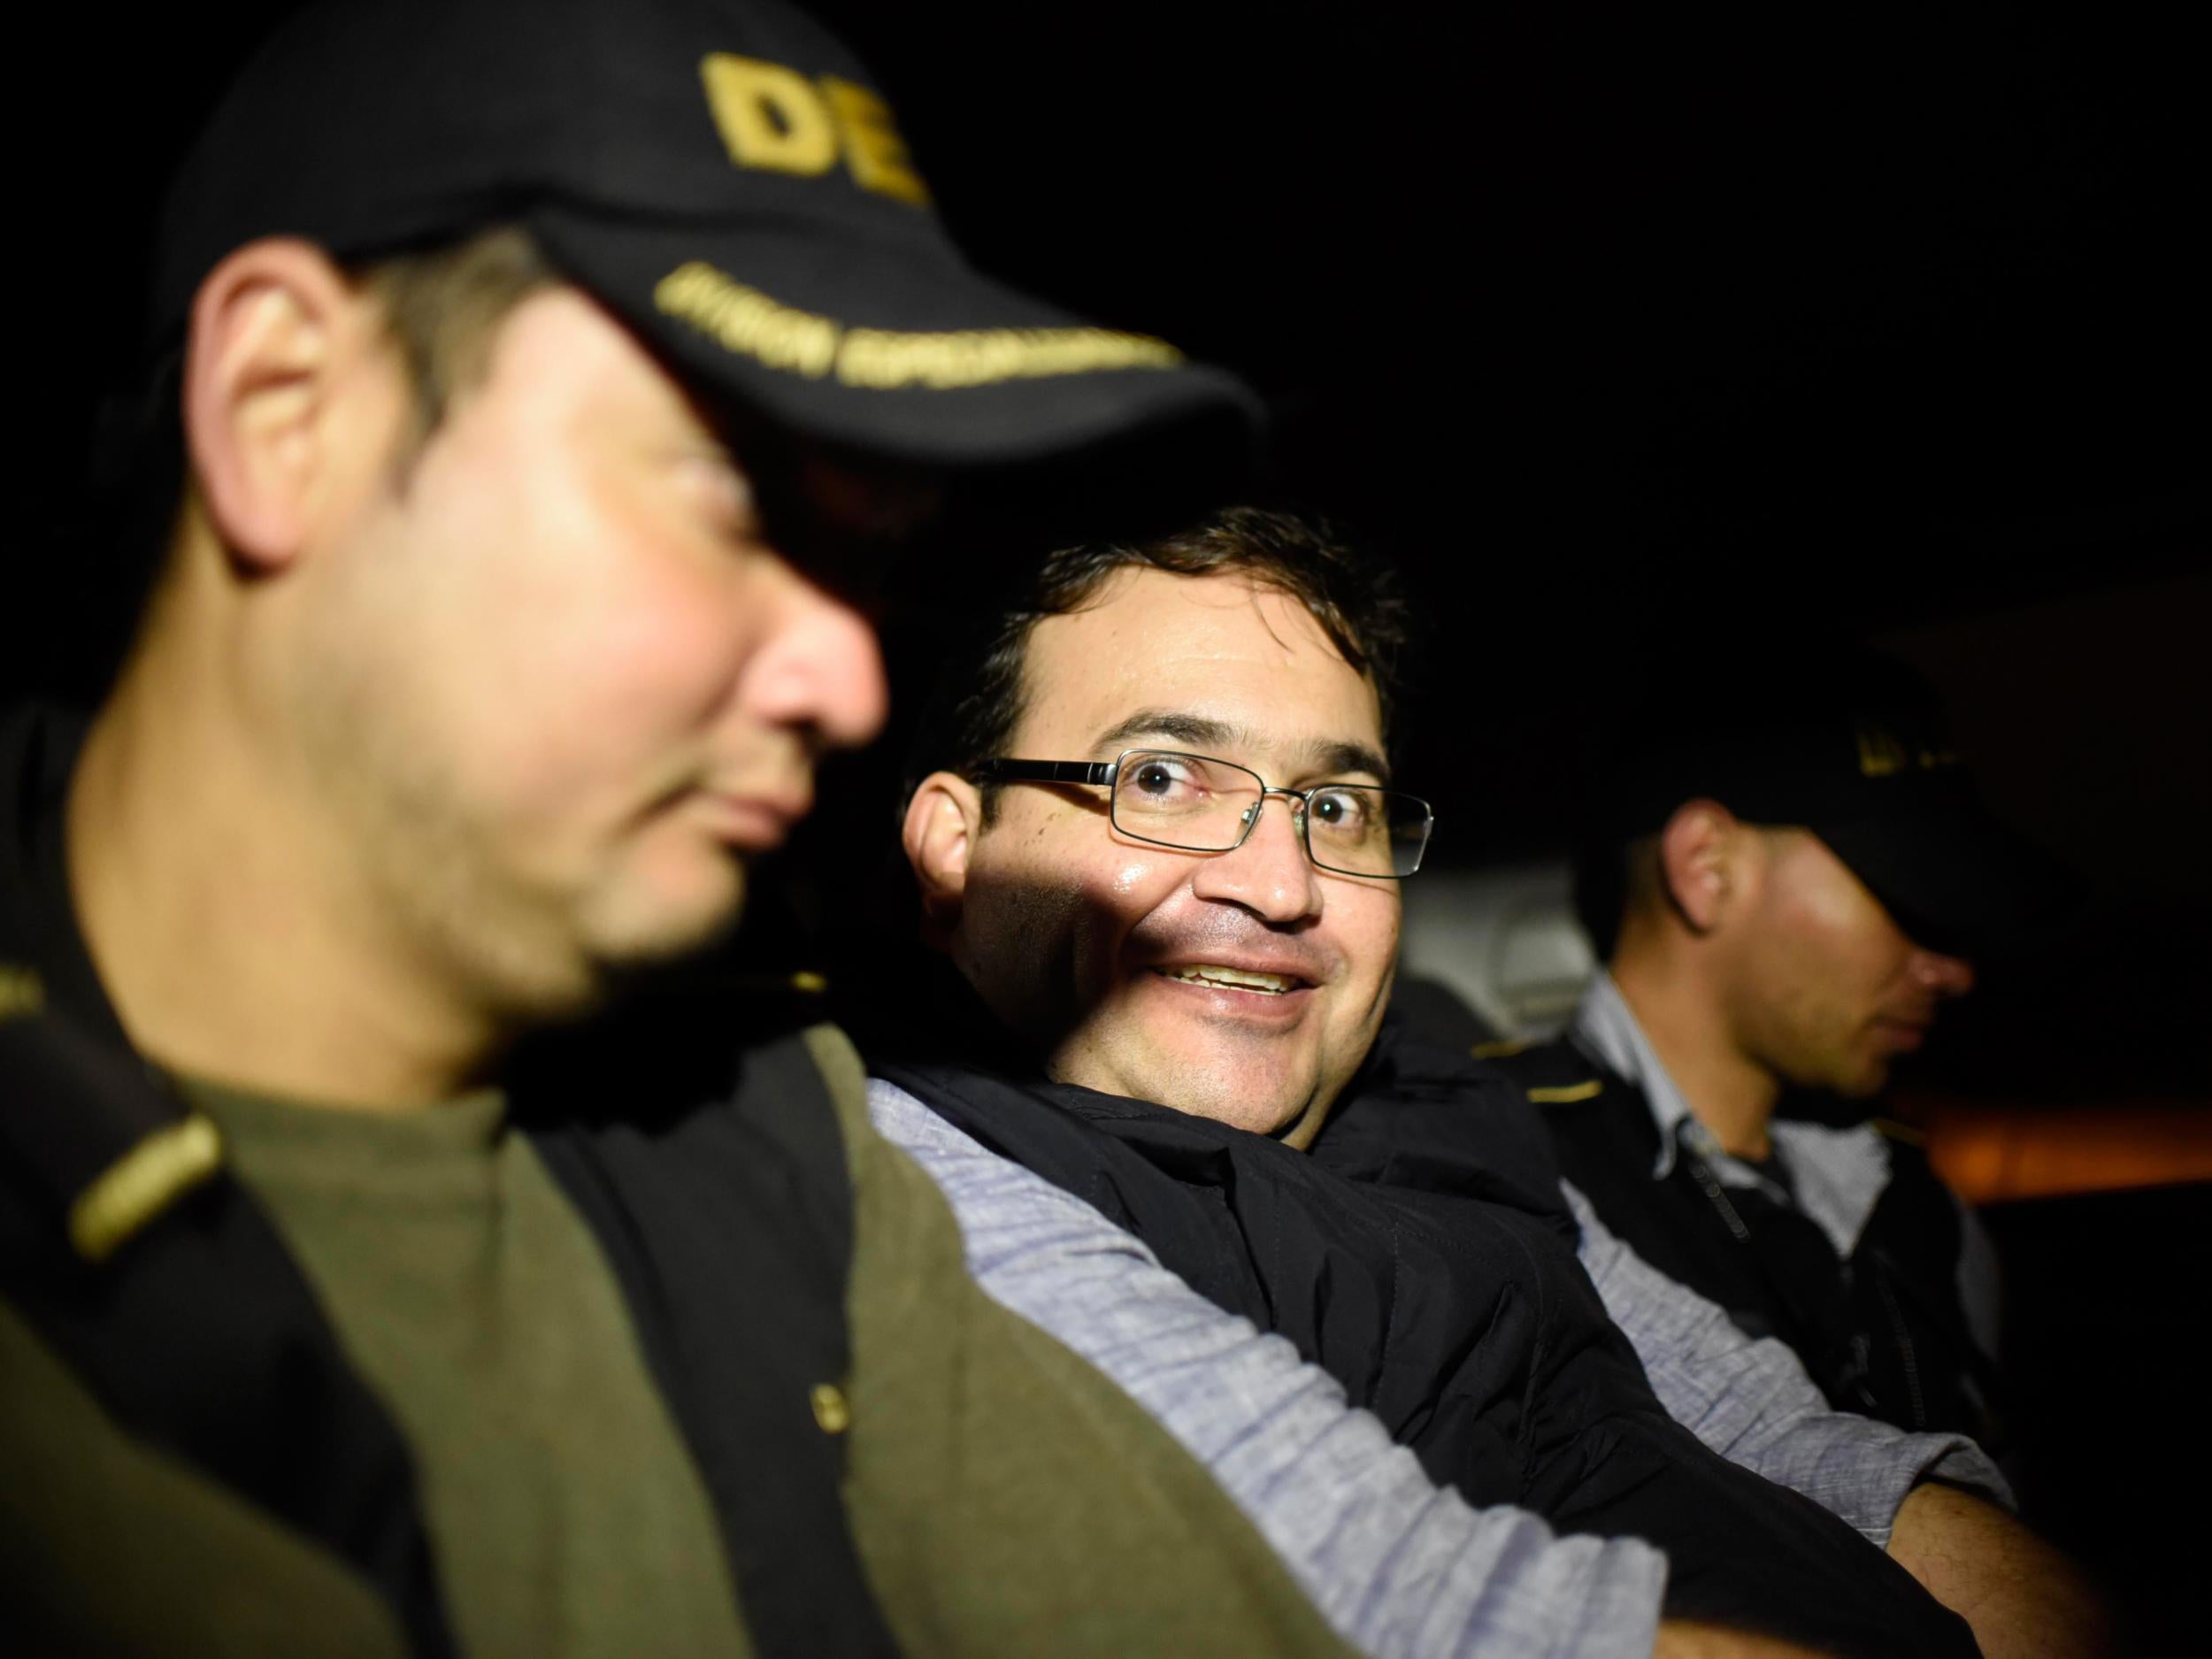 Former Veracruz governor Javier Duarte with officers in Guatemala after six months on the run